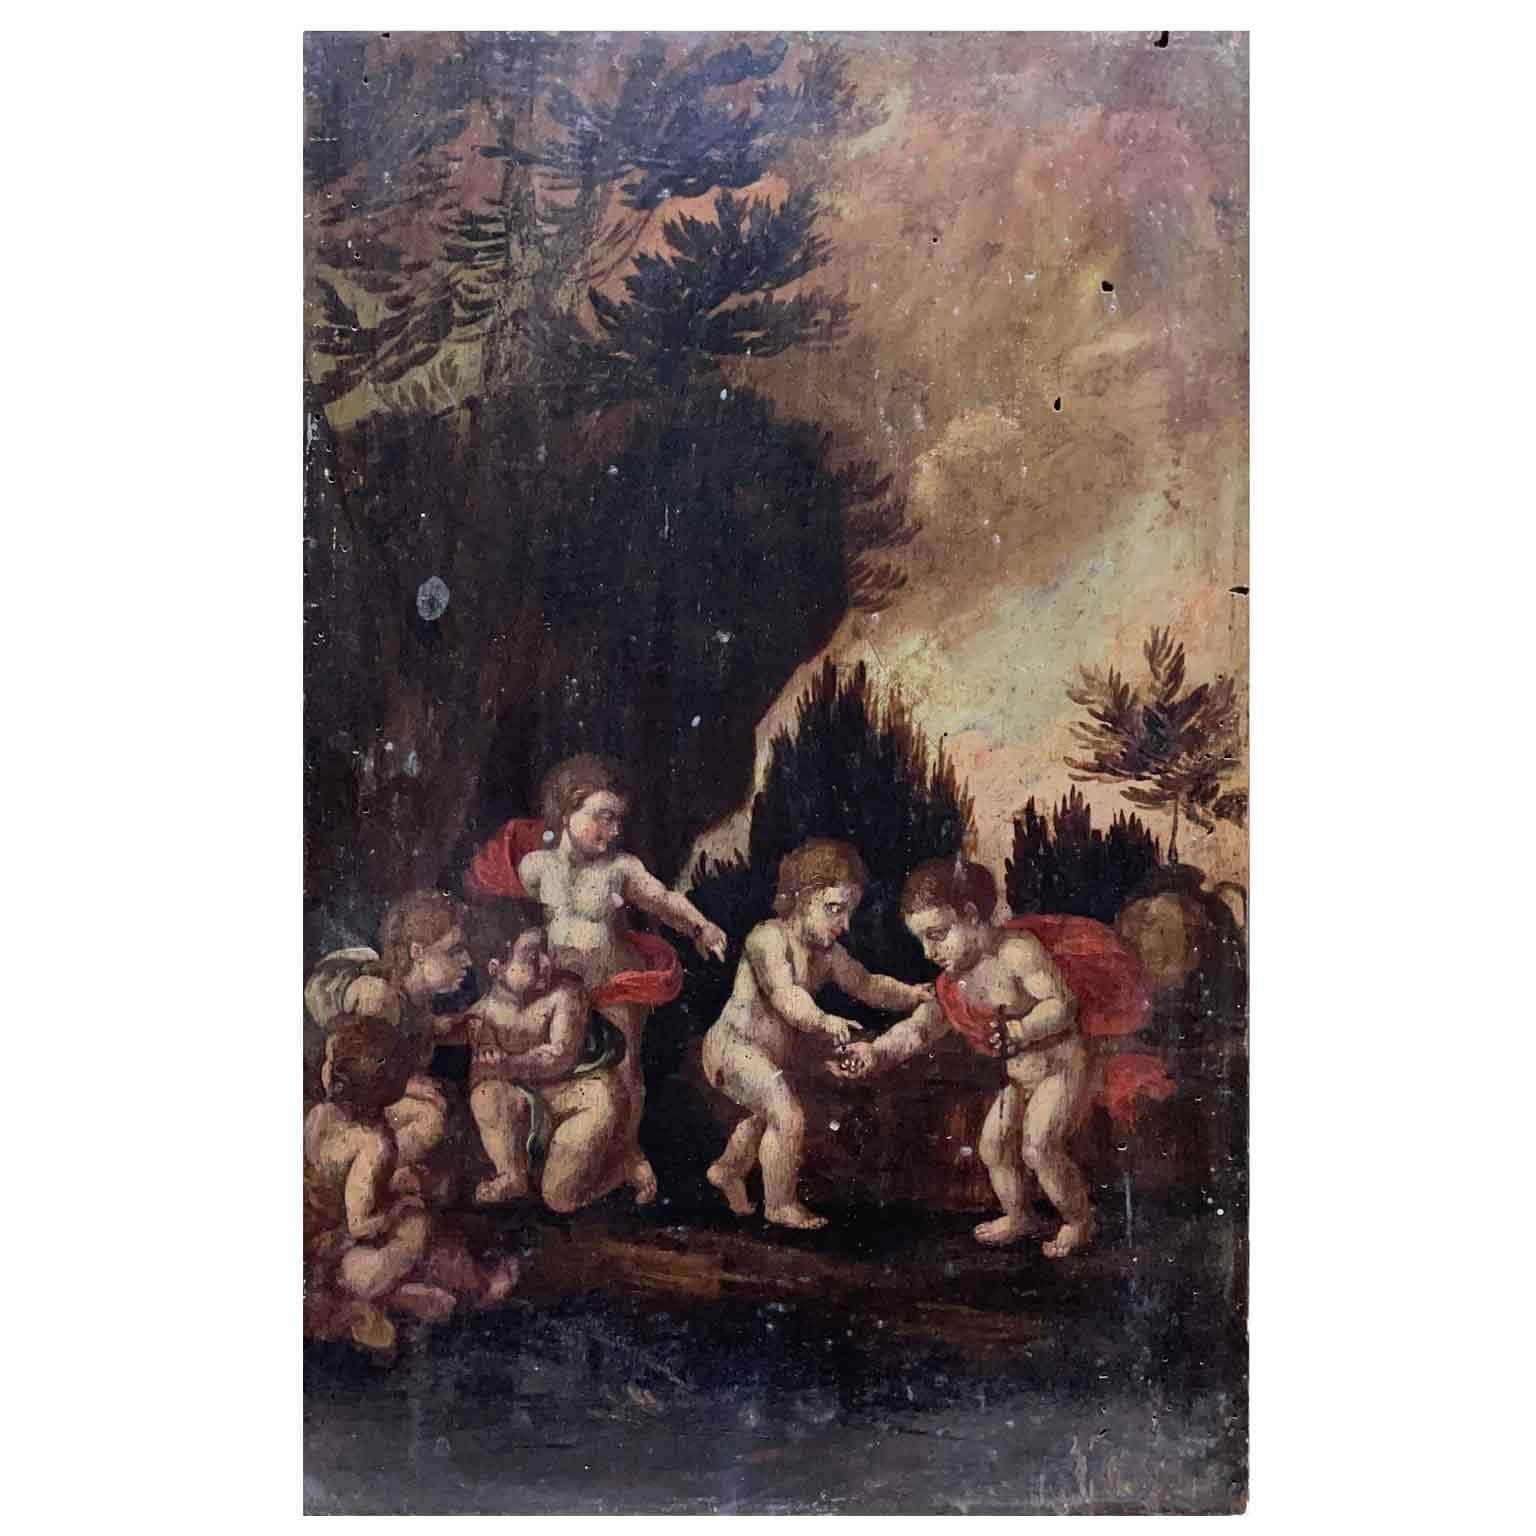 19th century pair of Putti oil paintings on wood, set of two walnut panels depicting woodland landscapes with cherubs playing of Italian origin. This set of two antique Italian putti Baroque style paintings dates back to mid 19th century and is in